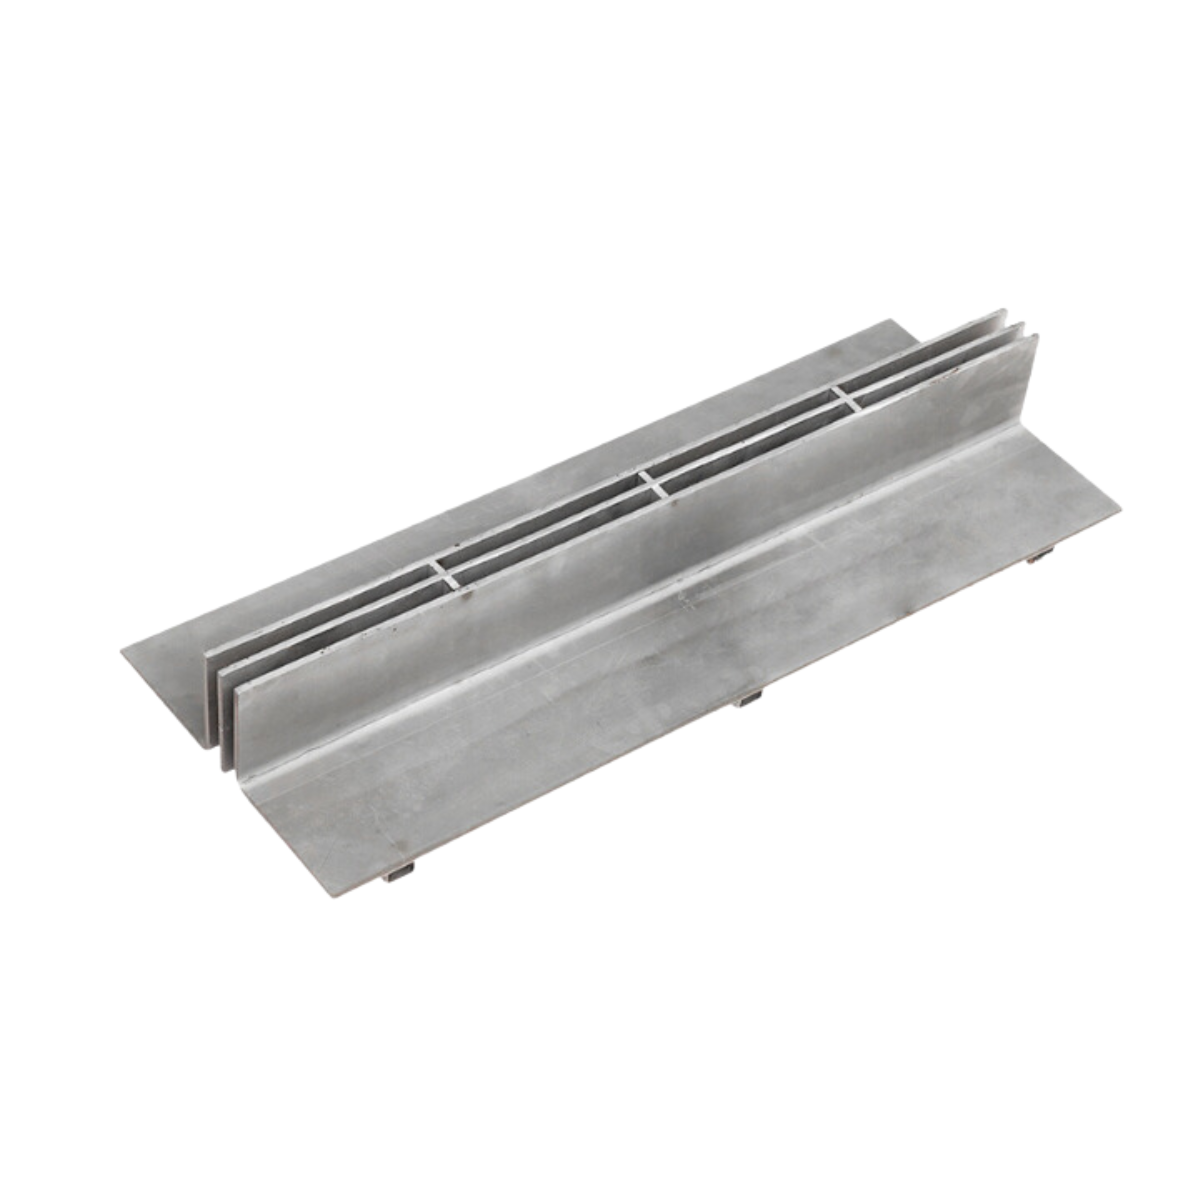 Stainless steel linear cover plate Stainless steel custom cover plate Drain cover Manhole cover Sewer repair manhole covers